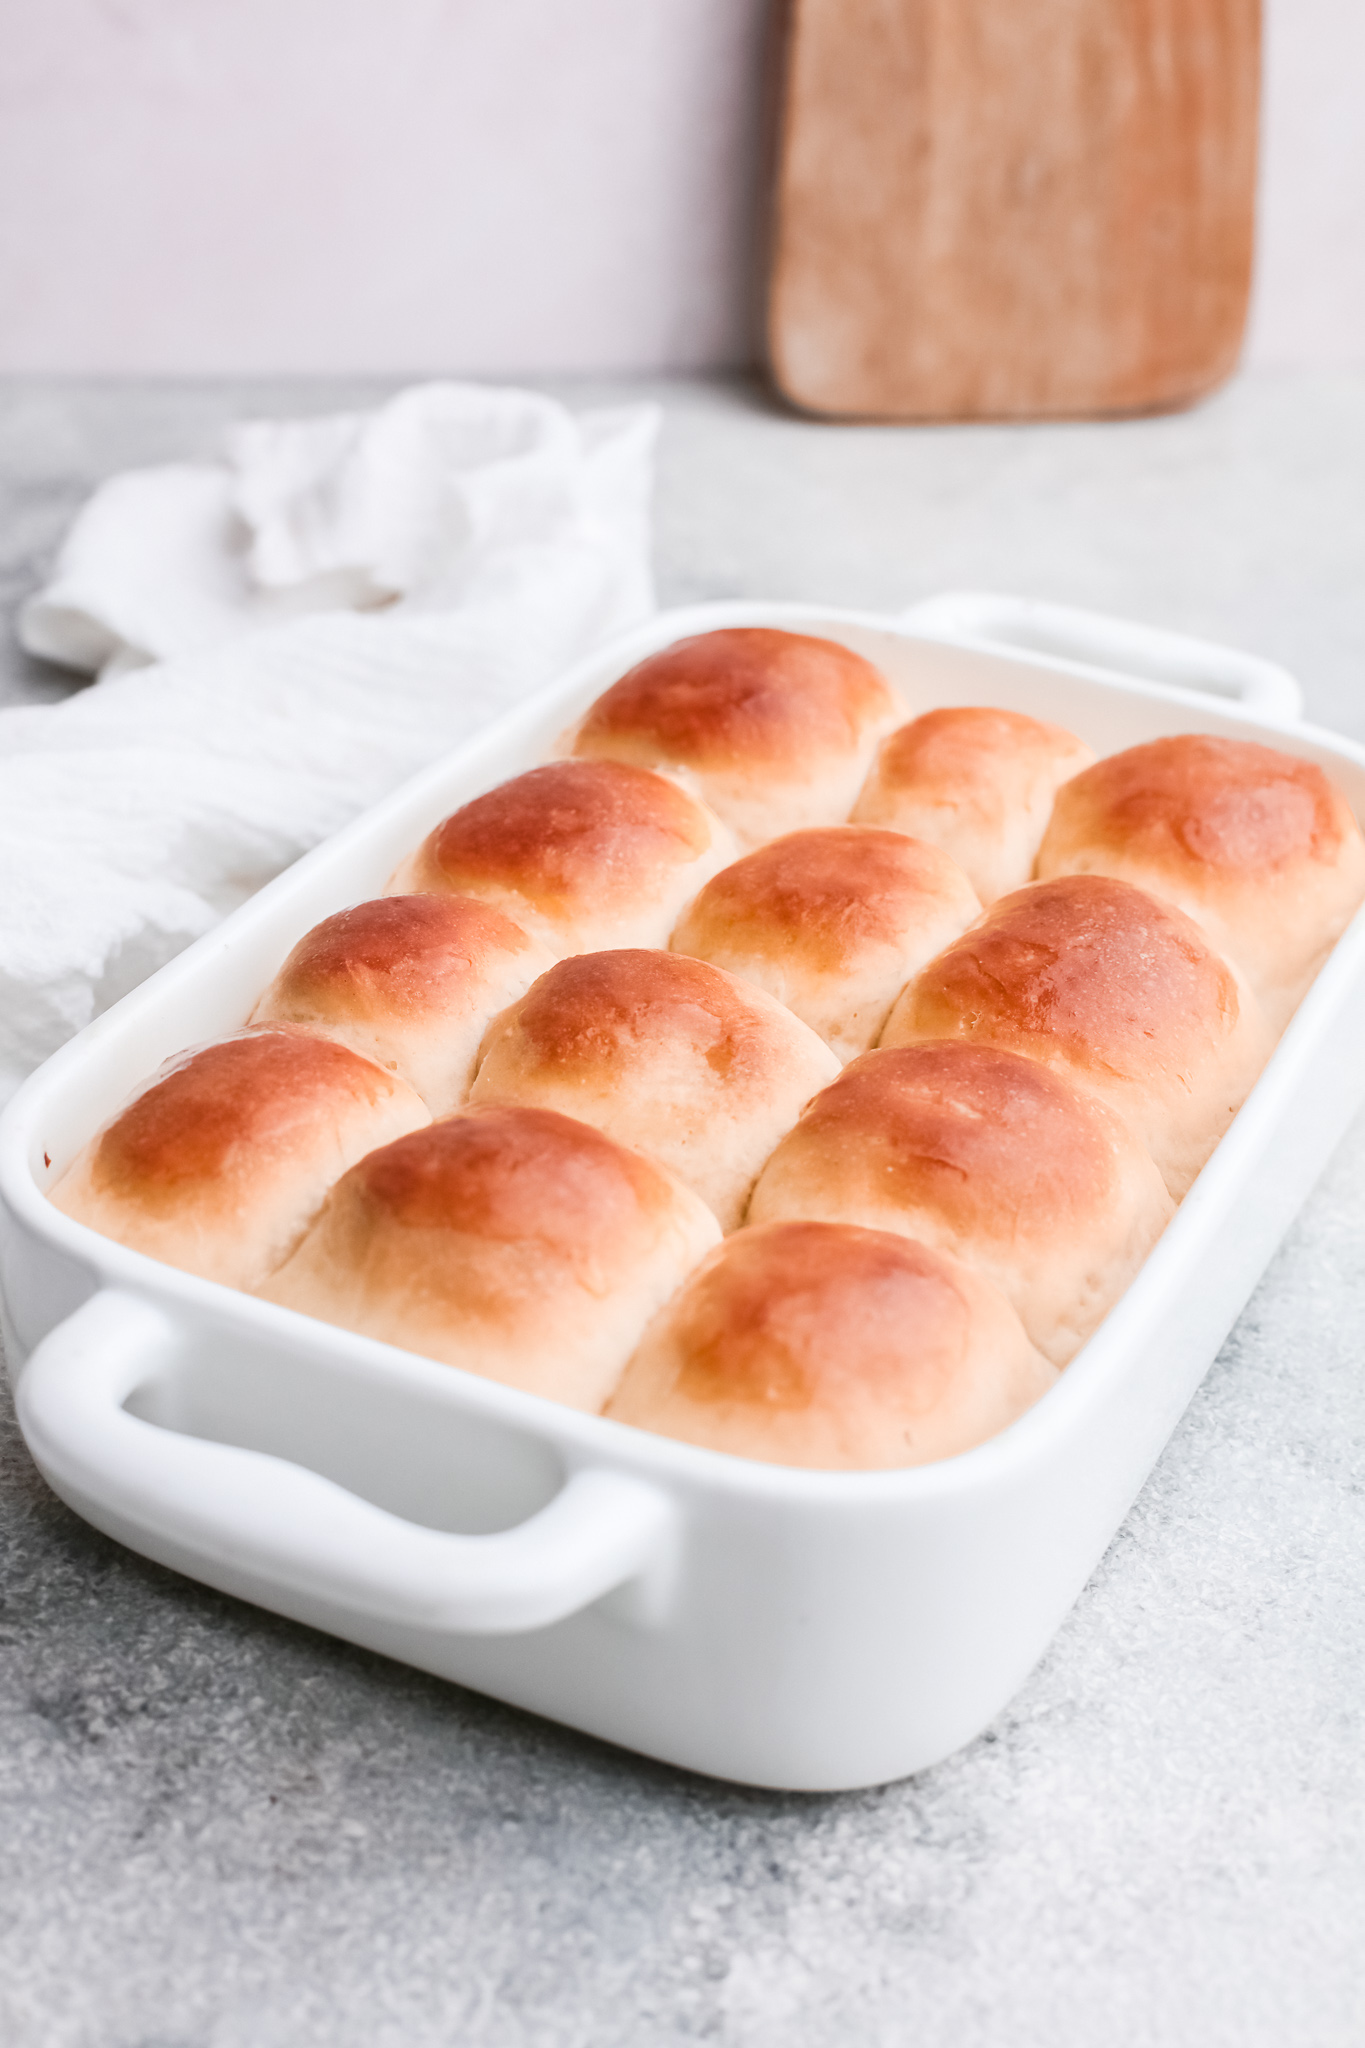 the completed easy yeast rolls in a baking dish